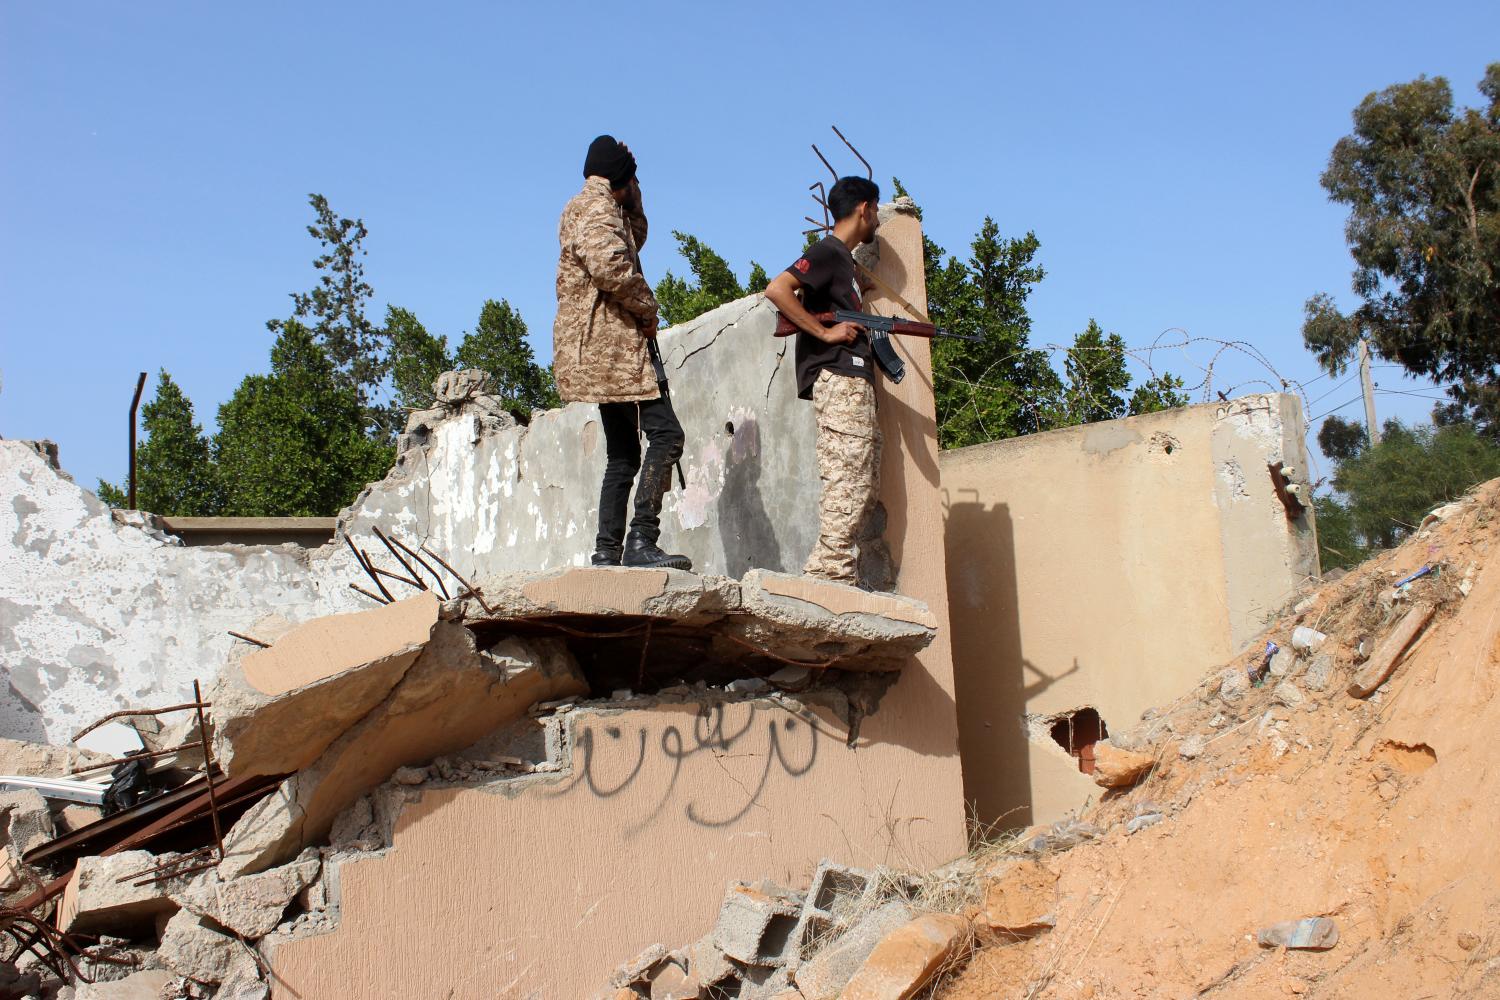 Members of the Libyan internationally recognised government forces look out from a destroyed building at Khallat Farjan area in Tripoli, Libya April 20, 2019. REUTERS/Ayman al-Sahili - RC19CE00E4B0